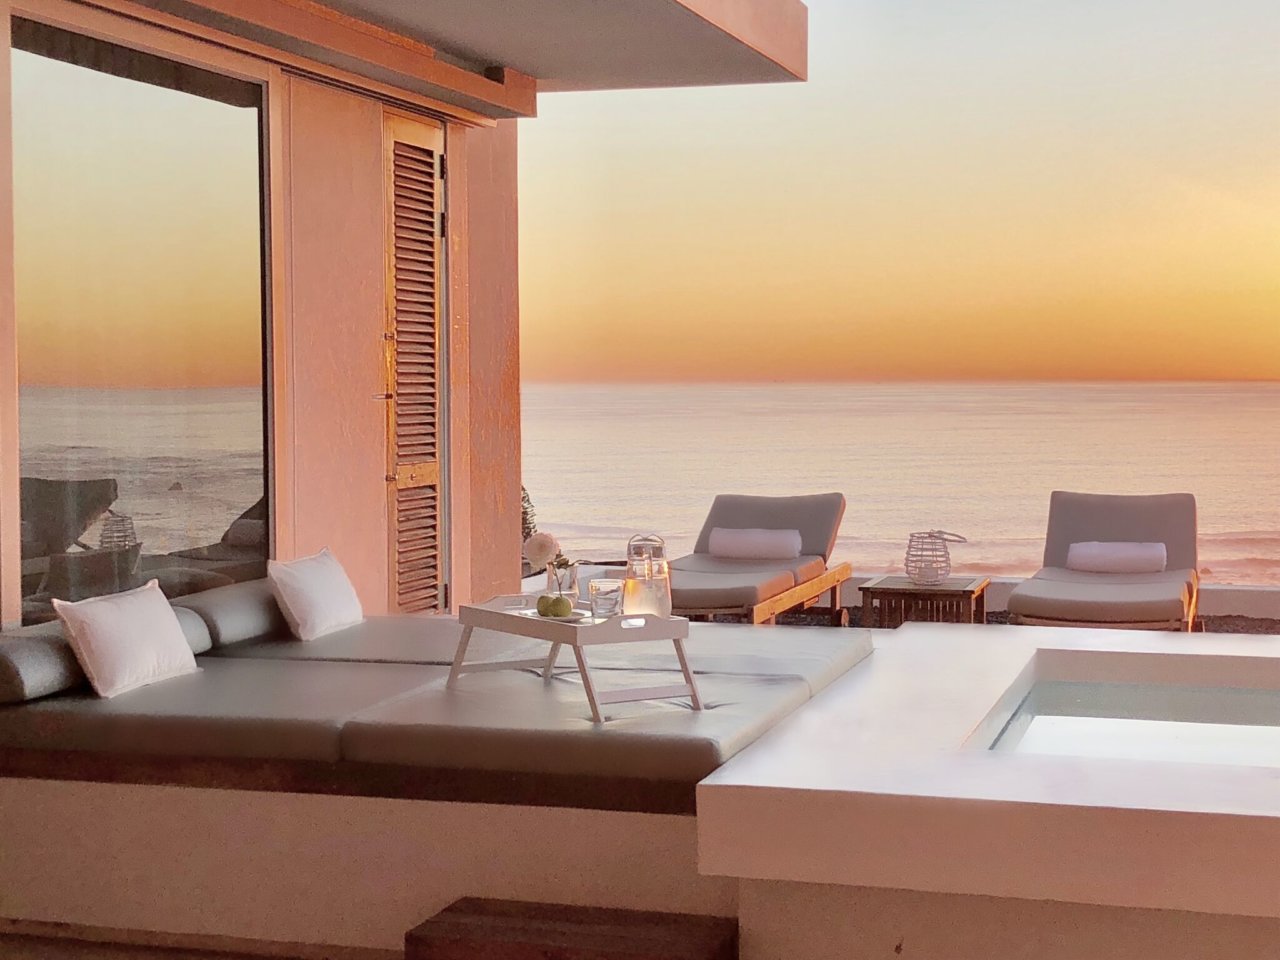 Photo 24 of Aqua Penthouse accommodation in Camps Bay, Cape Town with 2 bedrooms and 2 bathrooms